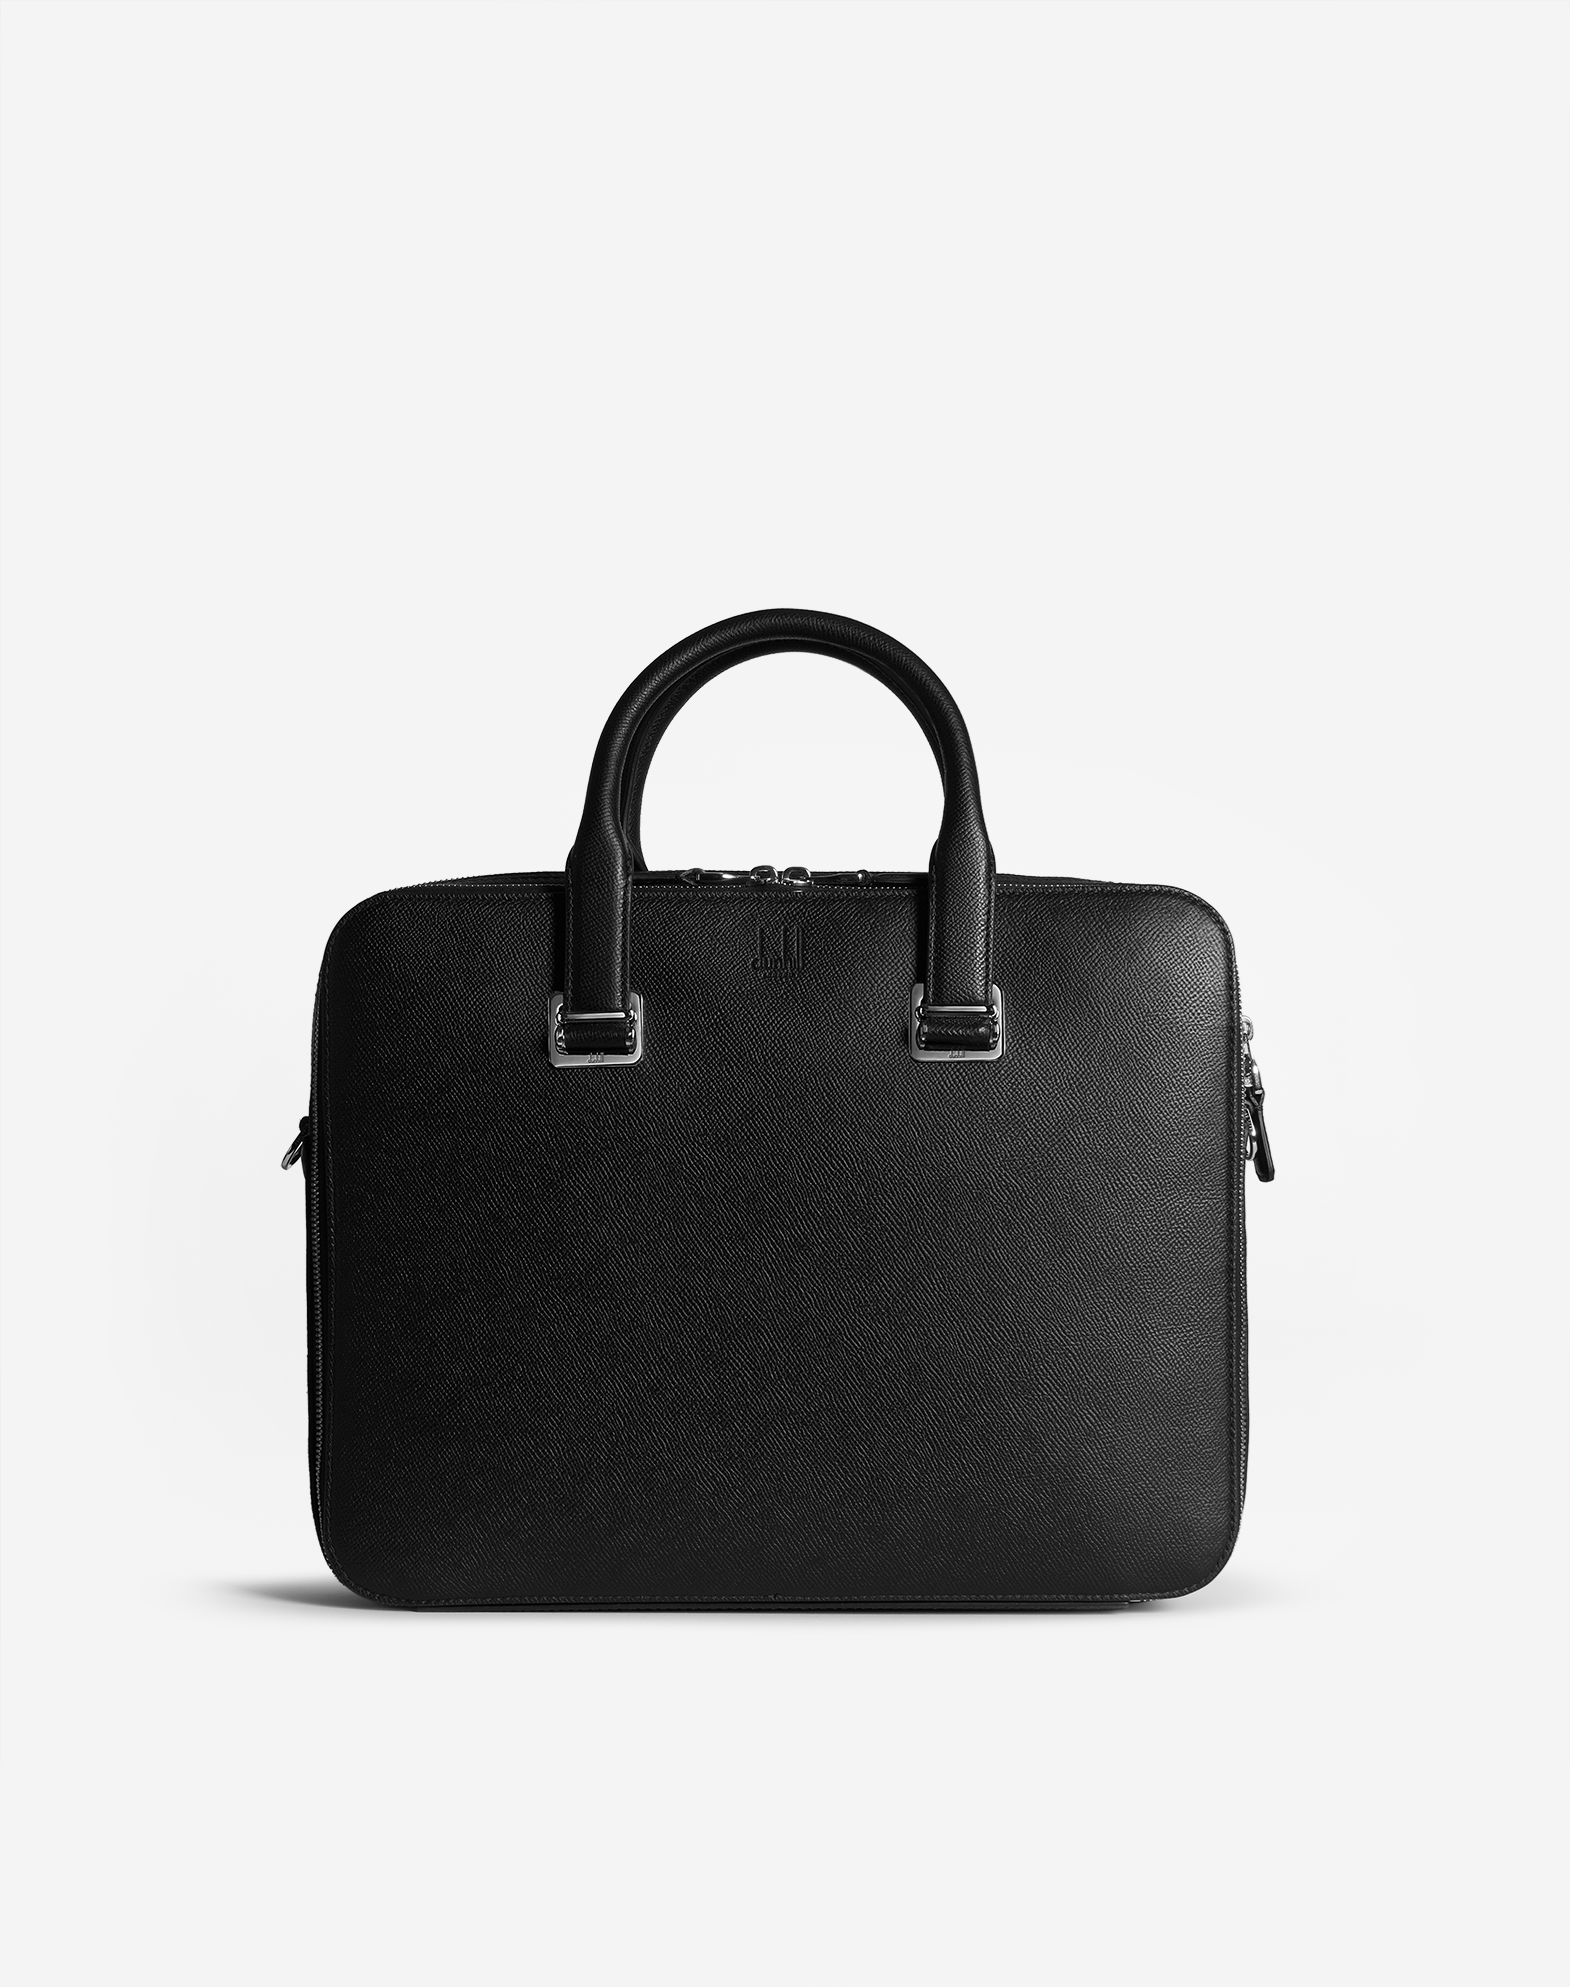 Dunhill Luxury Men's Briefcases